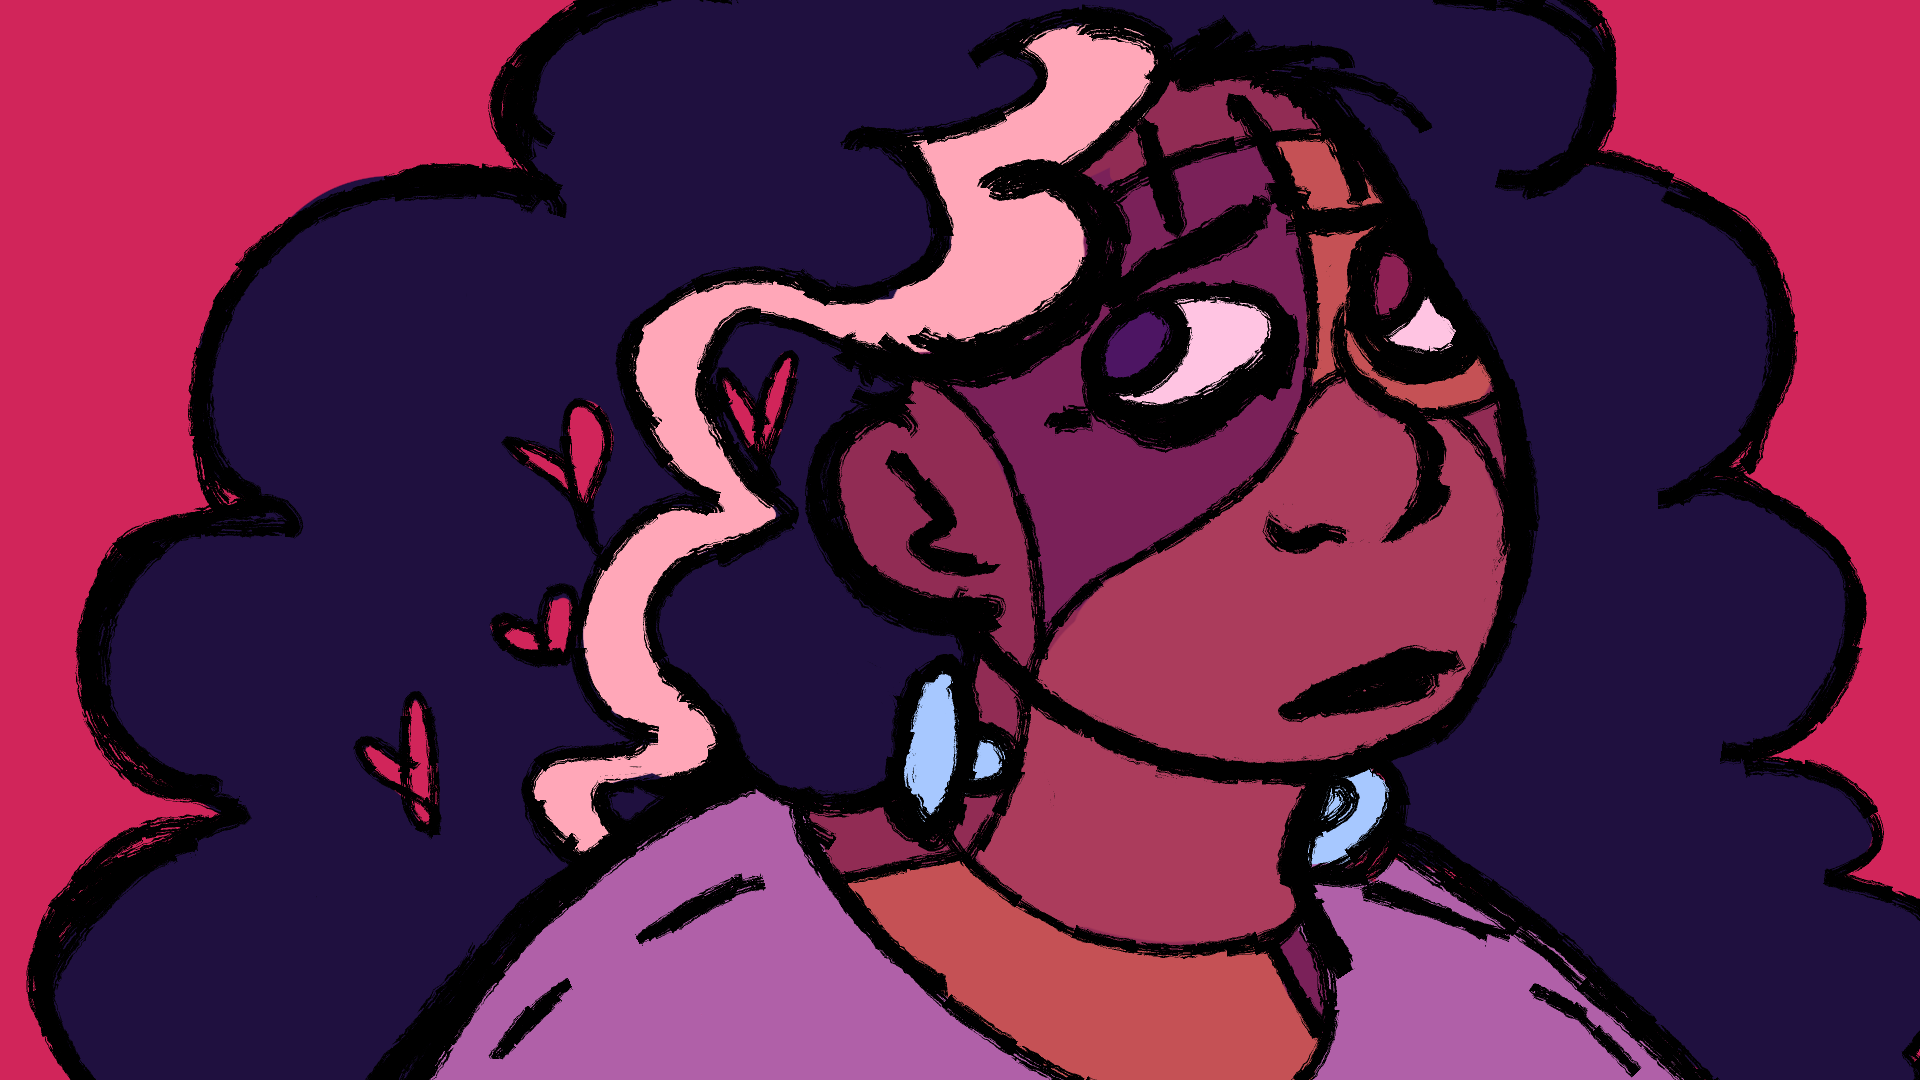 A headshot drawing of Emmett, turned to the left but looking up at the camera. The color palette is very red and purple and generally dramatic. There are a few hearts drawn to the side of their head.